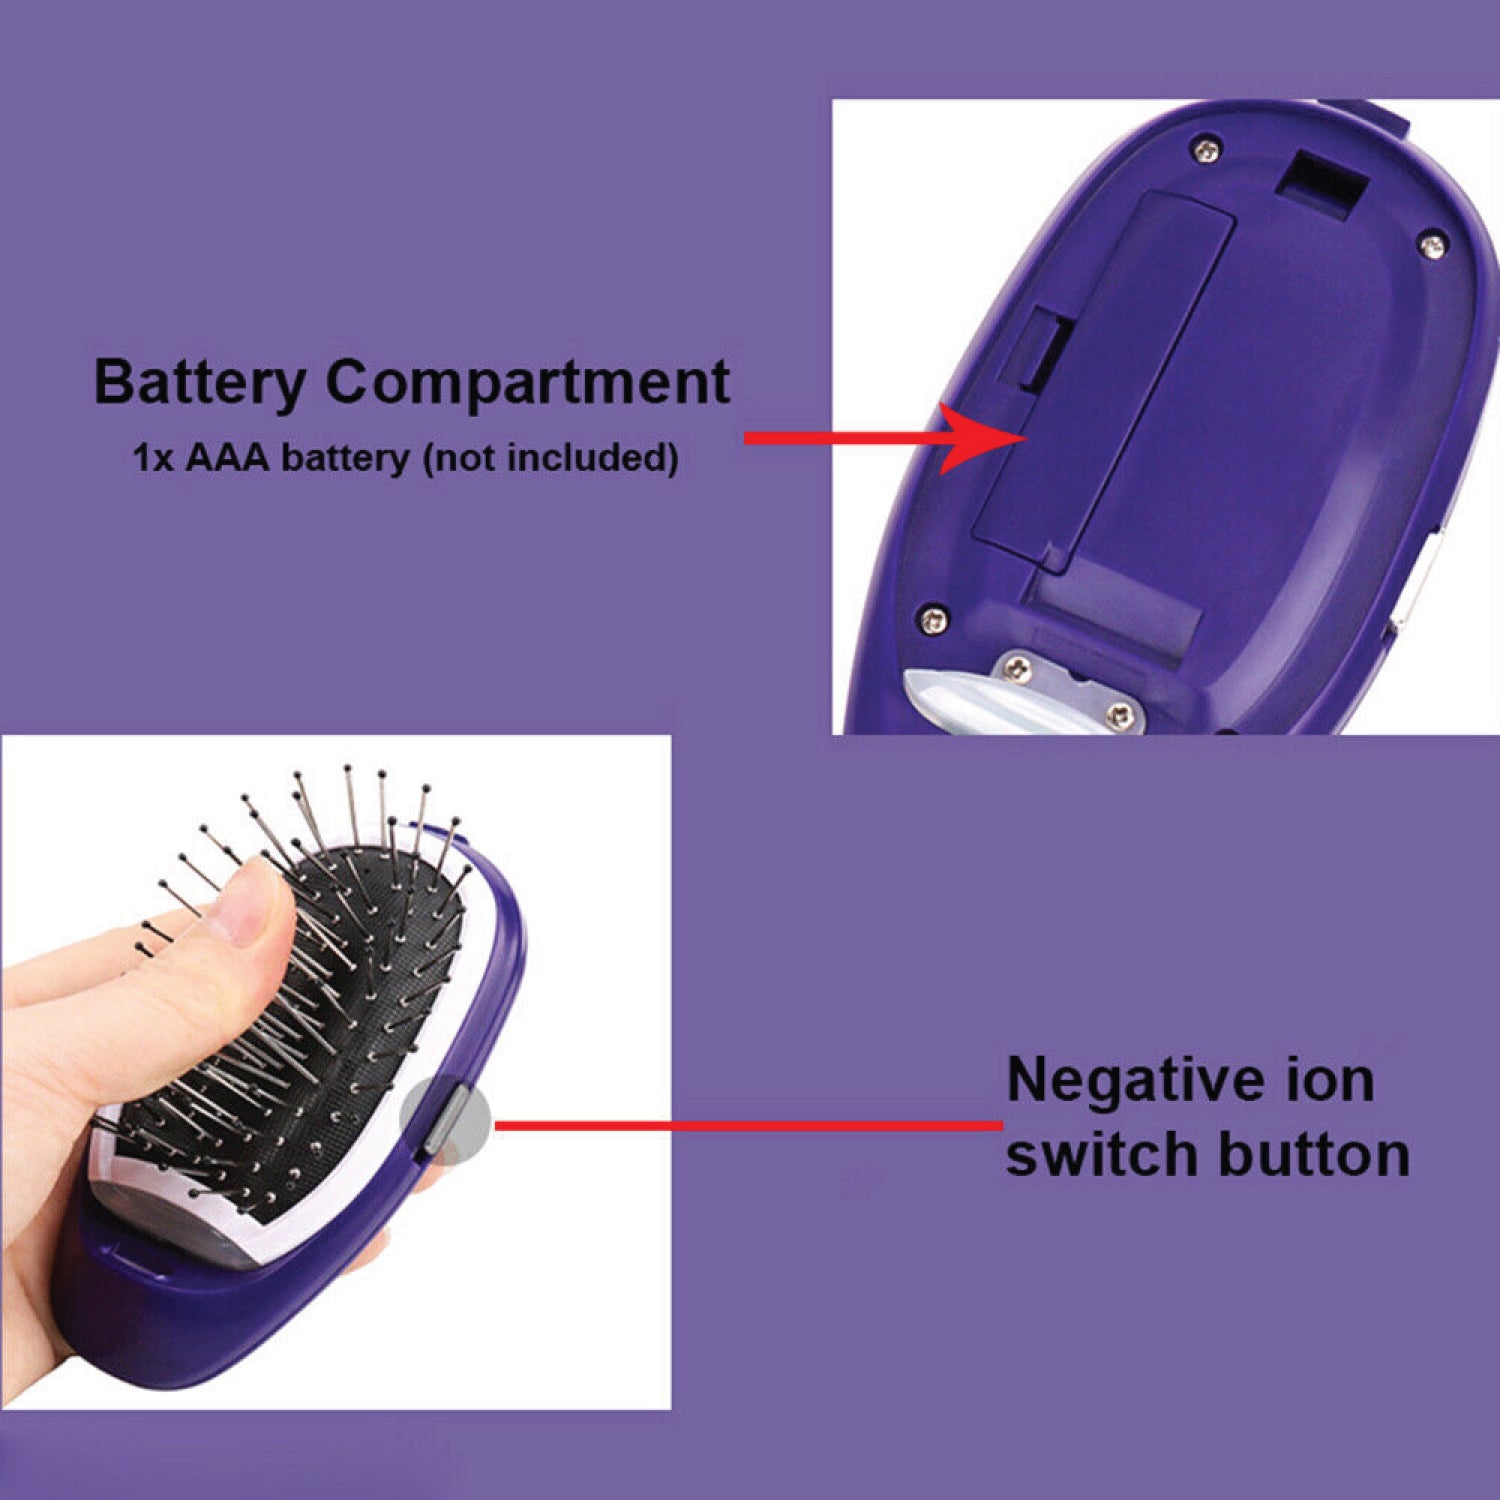 Vibrating Scalp Massager for Hair Growth